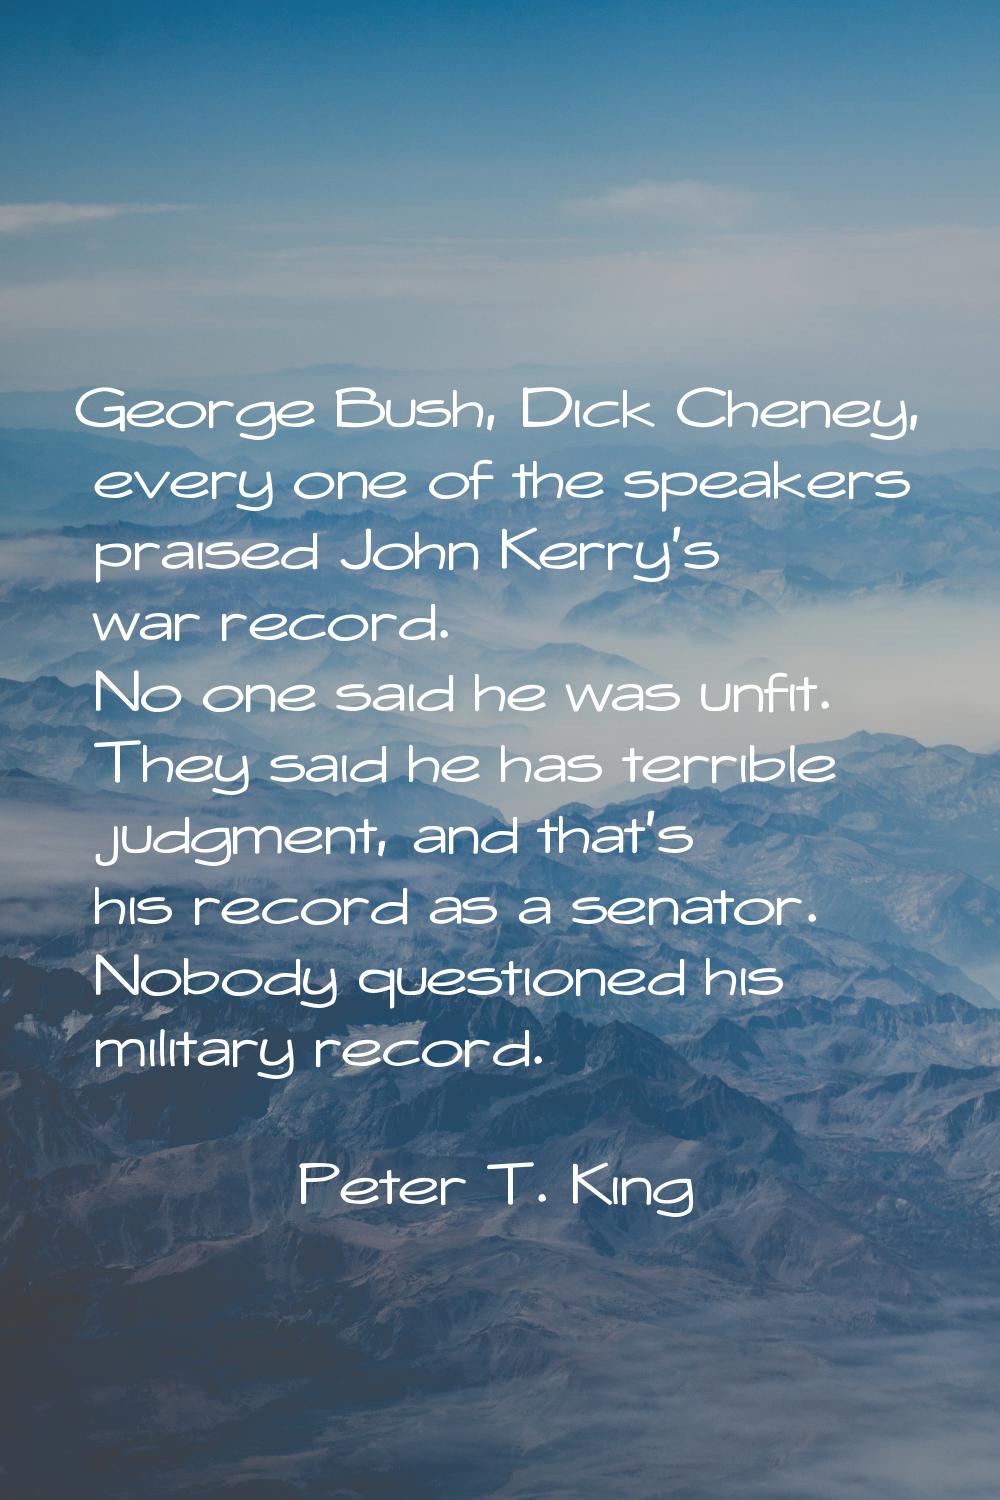 George Bush, Dick Cheney, every one of the speakers praised John Kerry's war record. No one said he